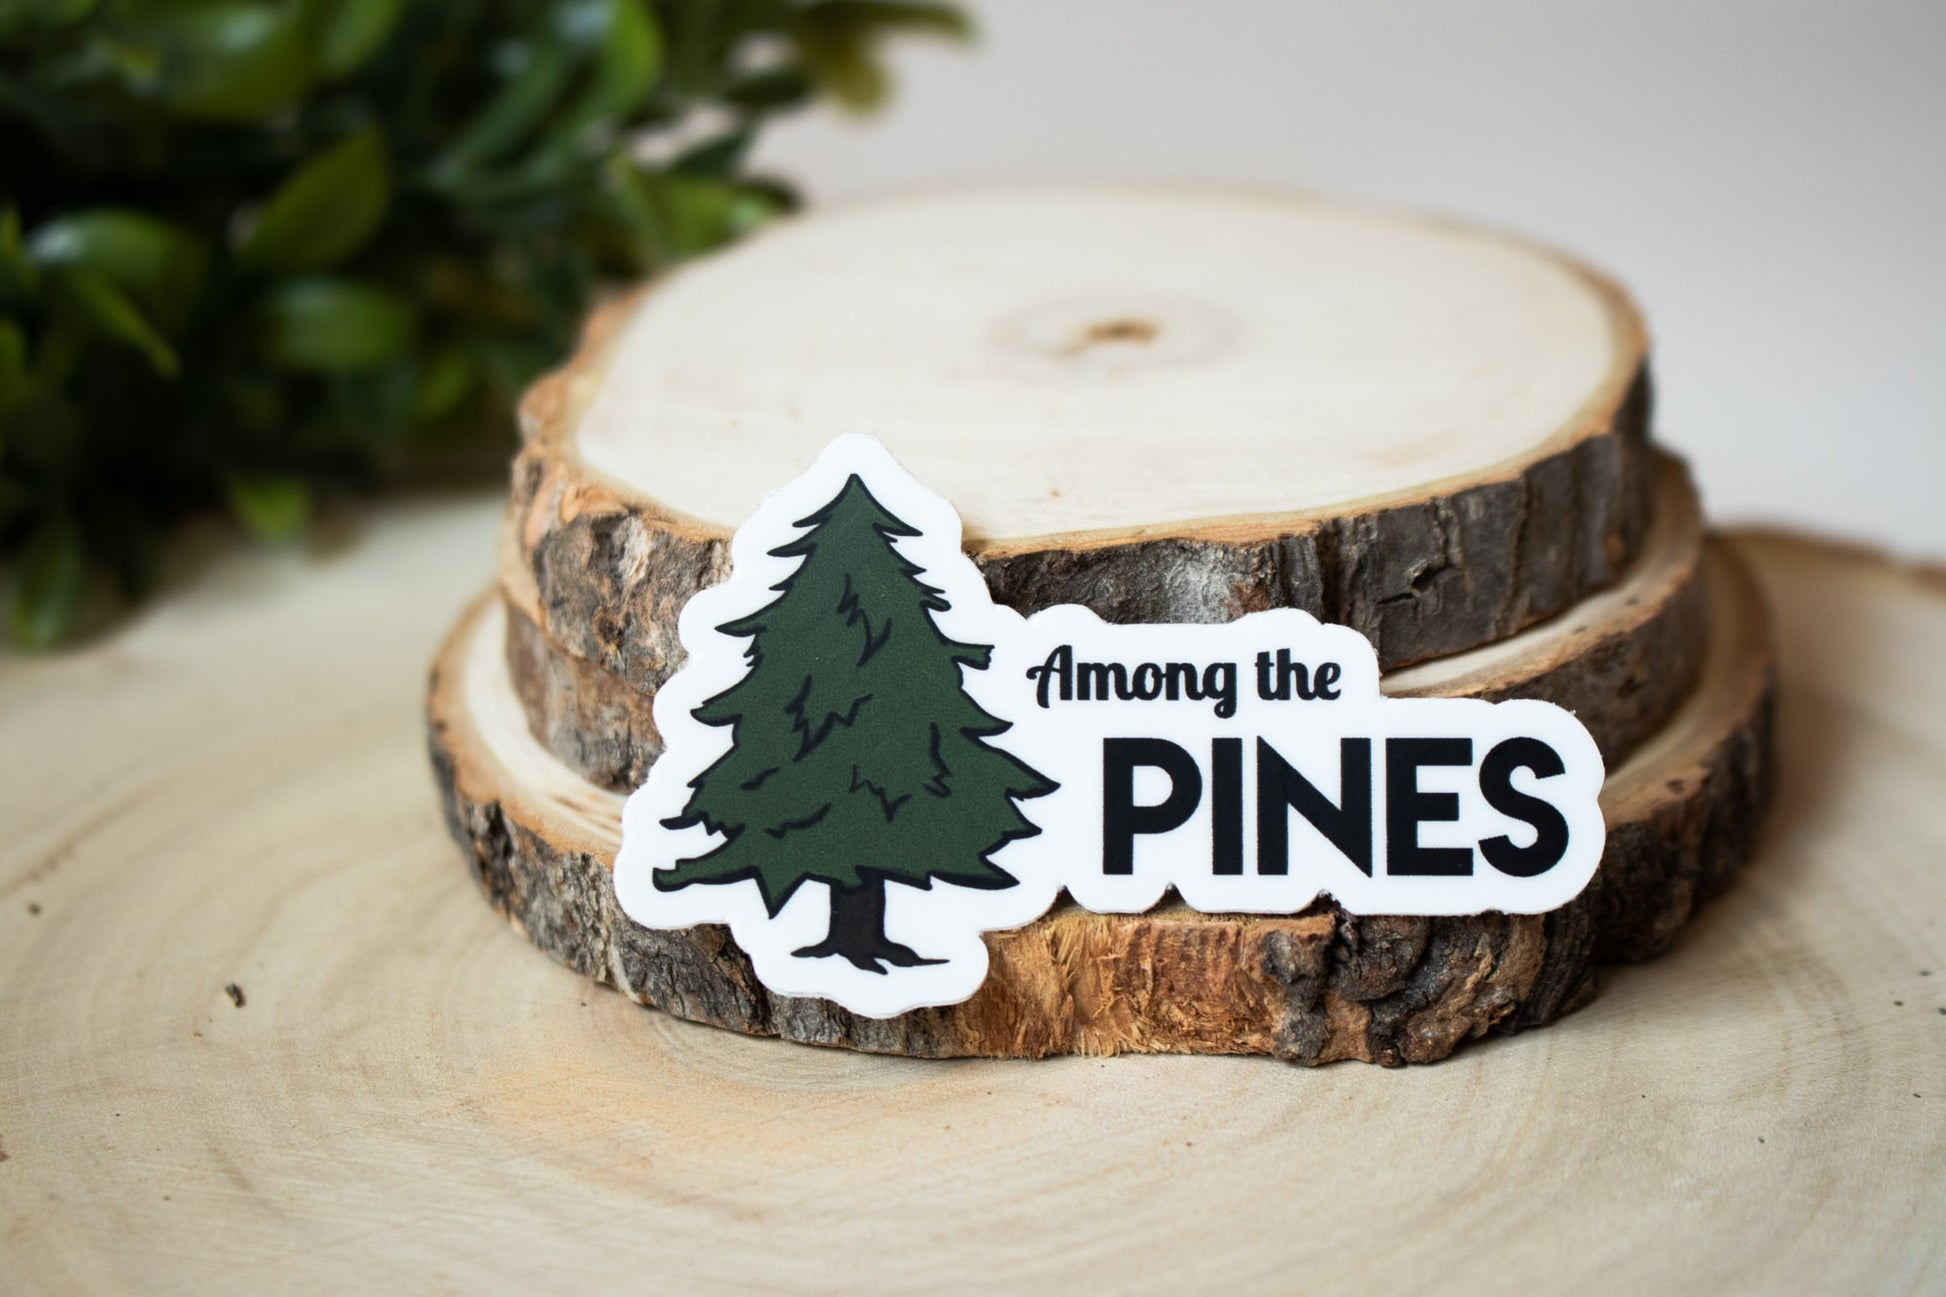 small pinetree sticker with full pinetree illustration in green with black text "among the pines"